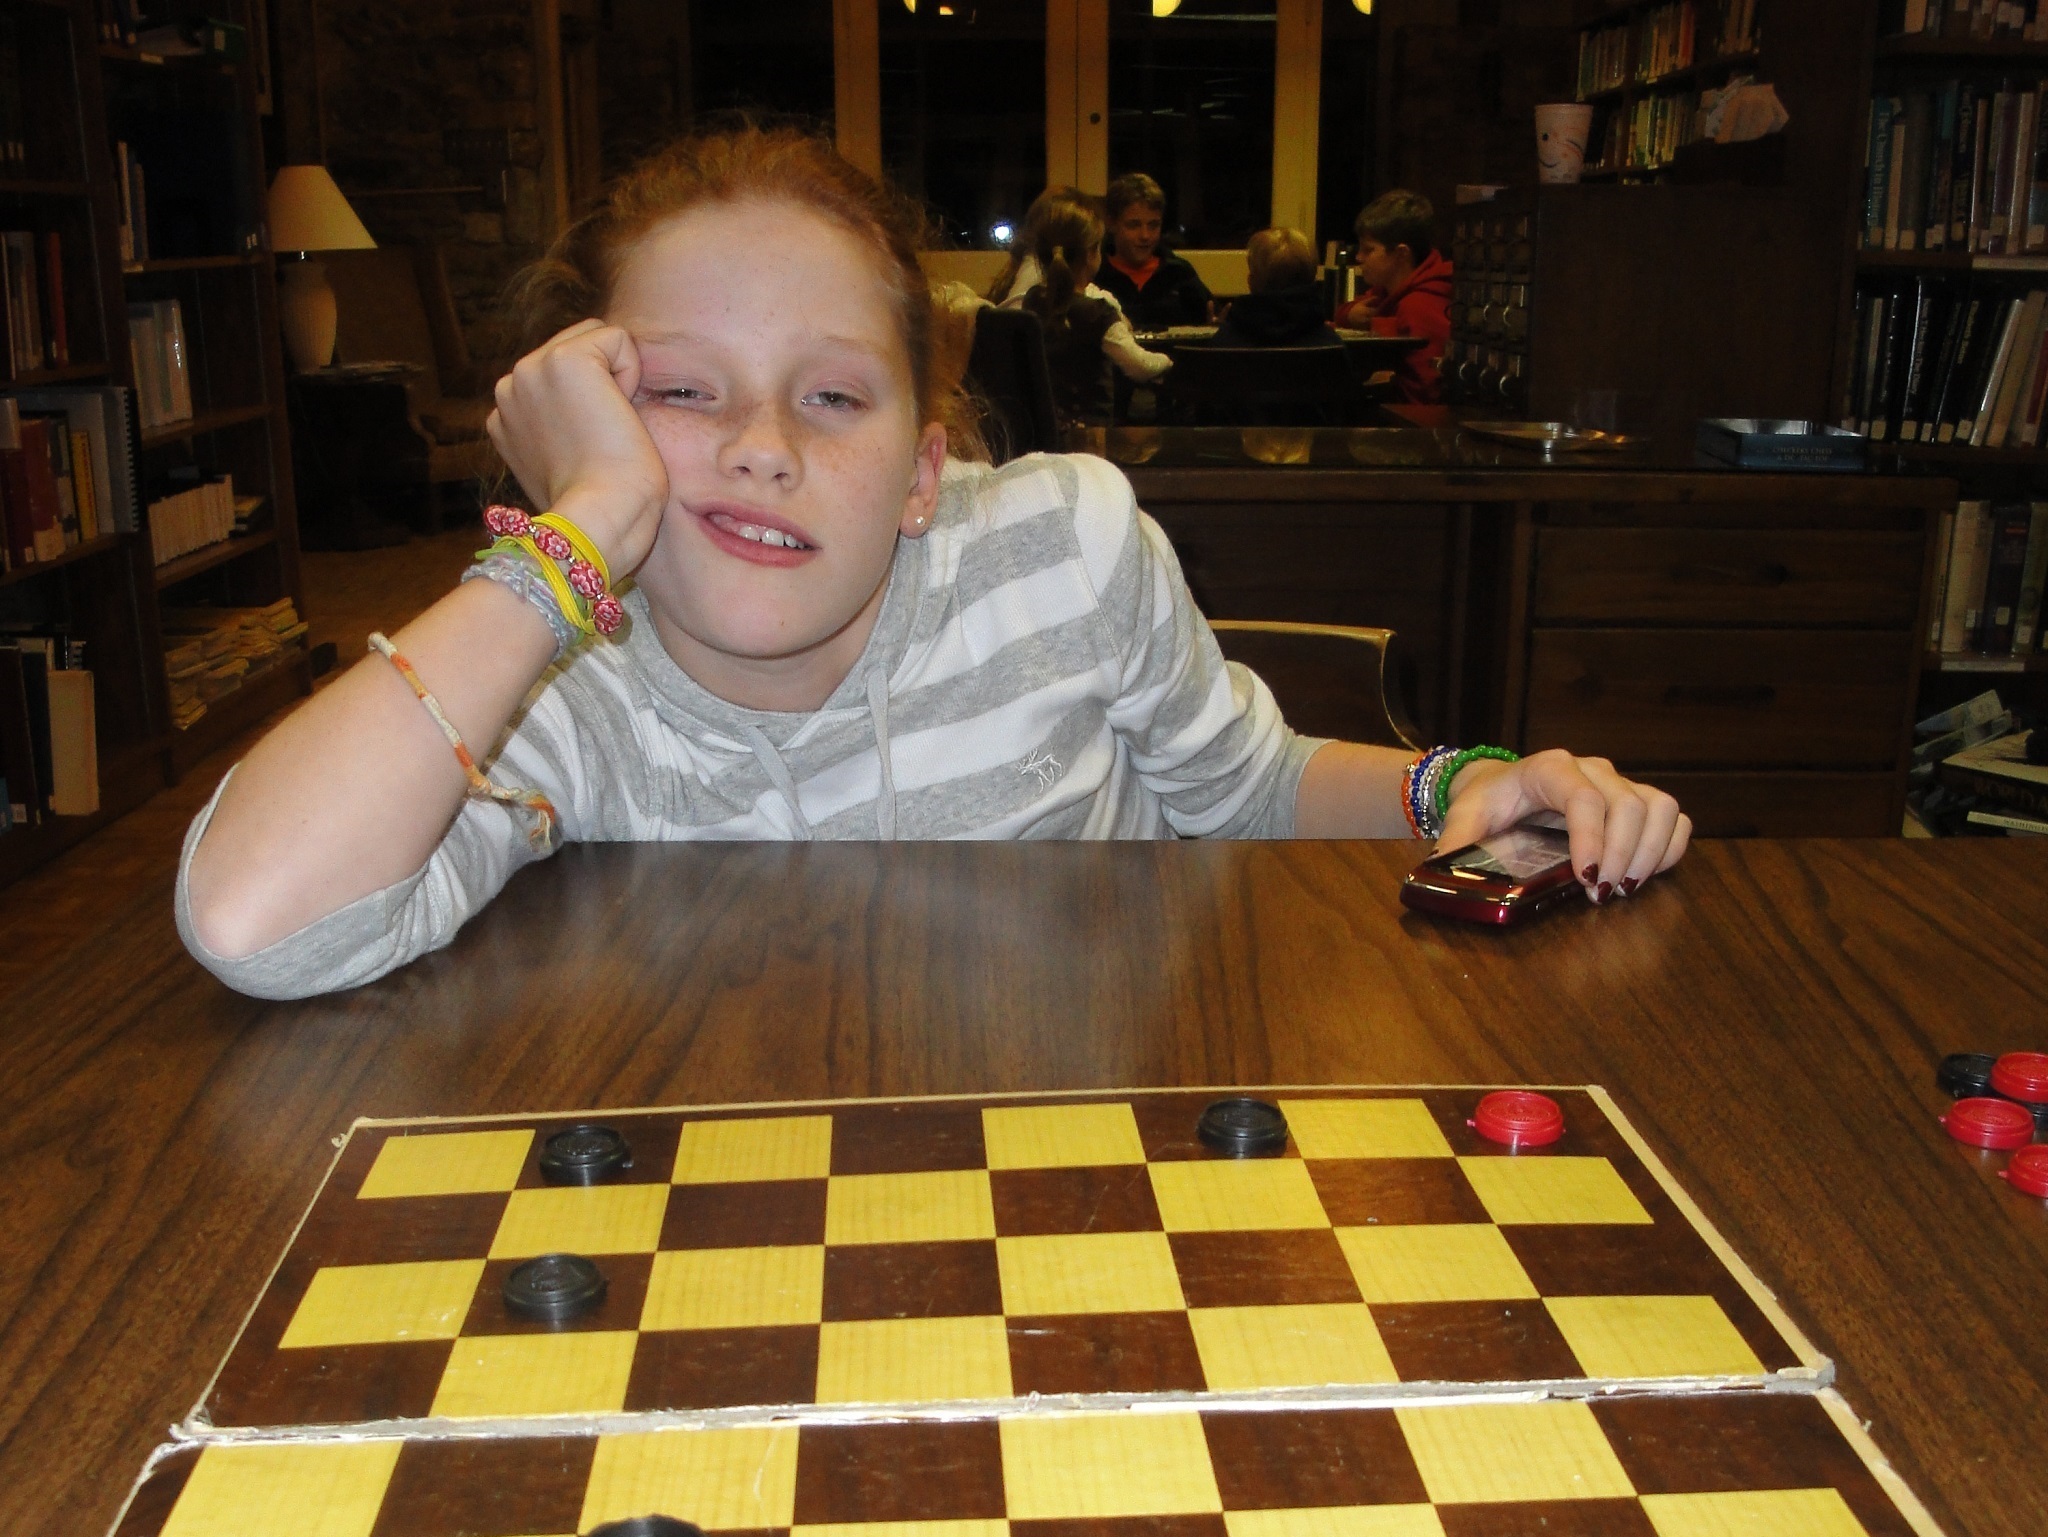 thanksgiving checkers loss 1 Every Thanksgiving His Cousin Challenges Him to Checkers... 8 Years of Defeat and Counting